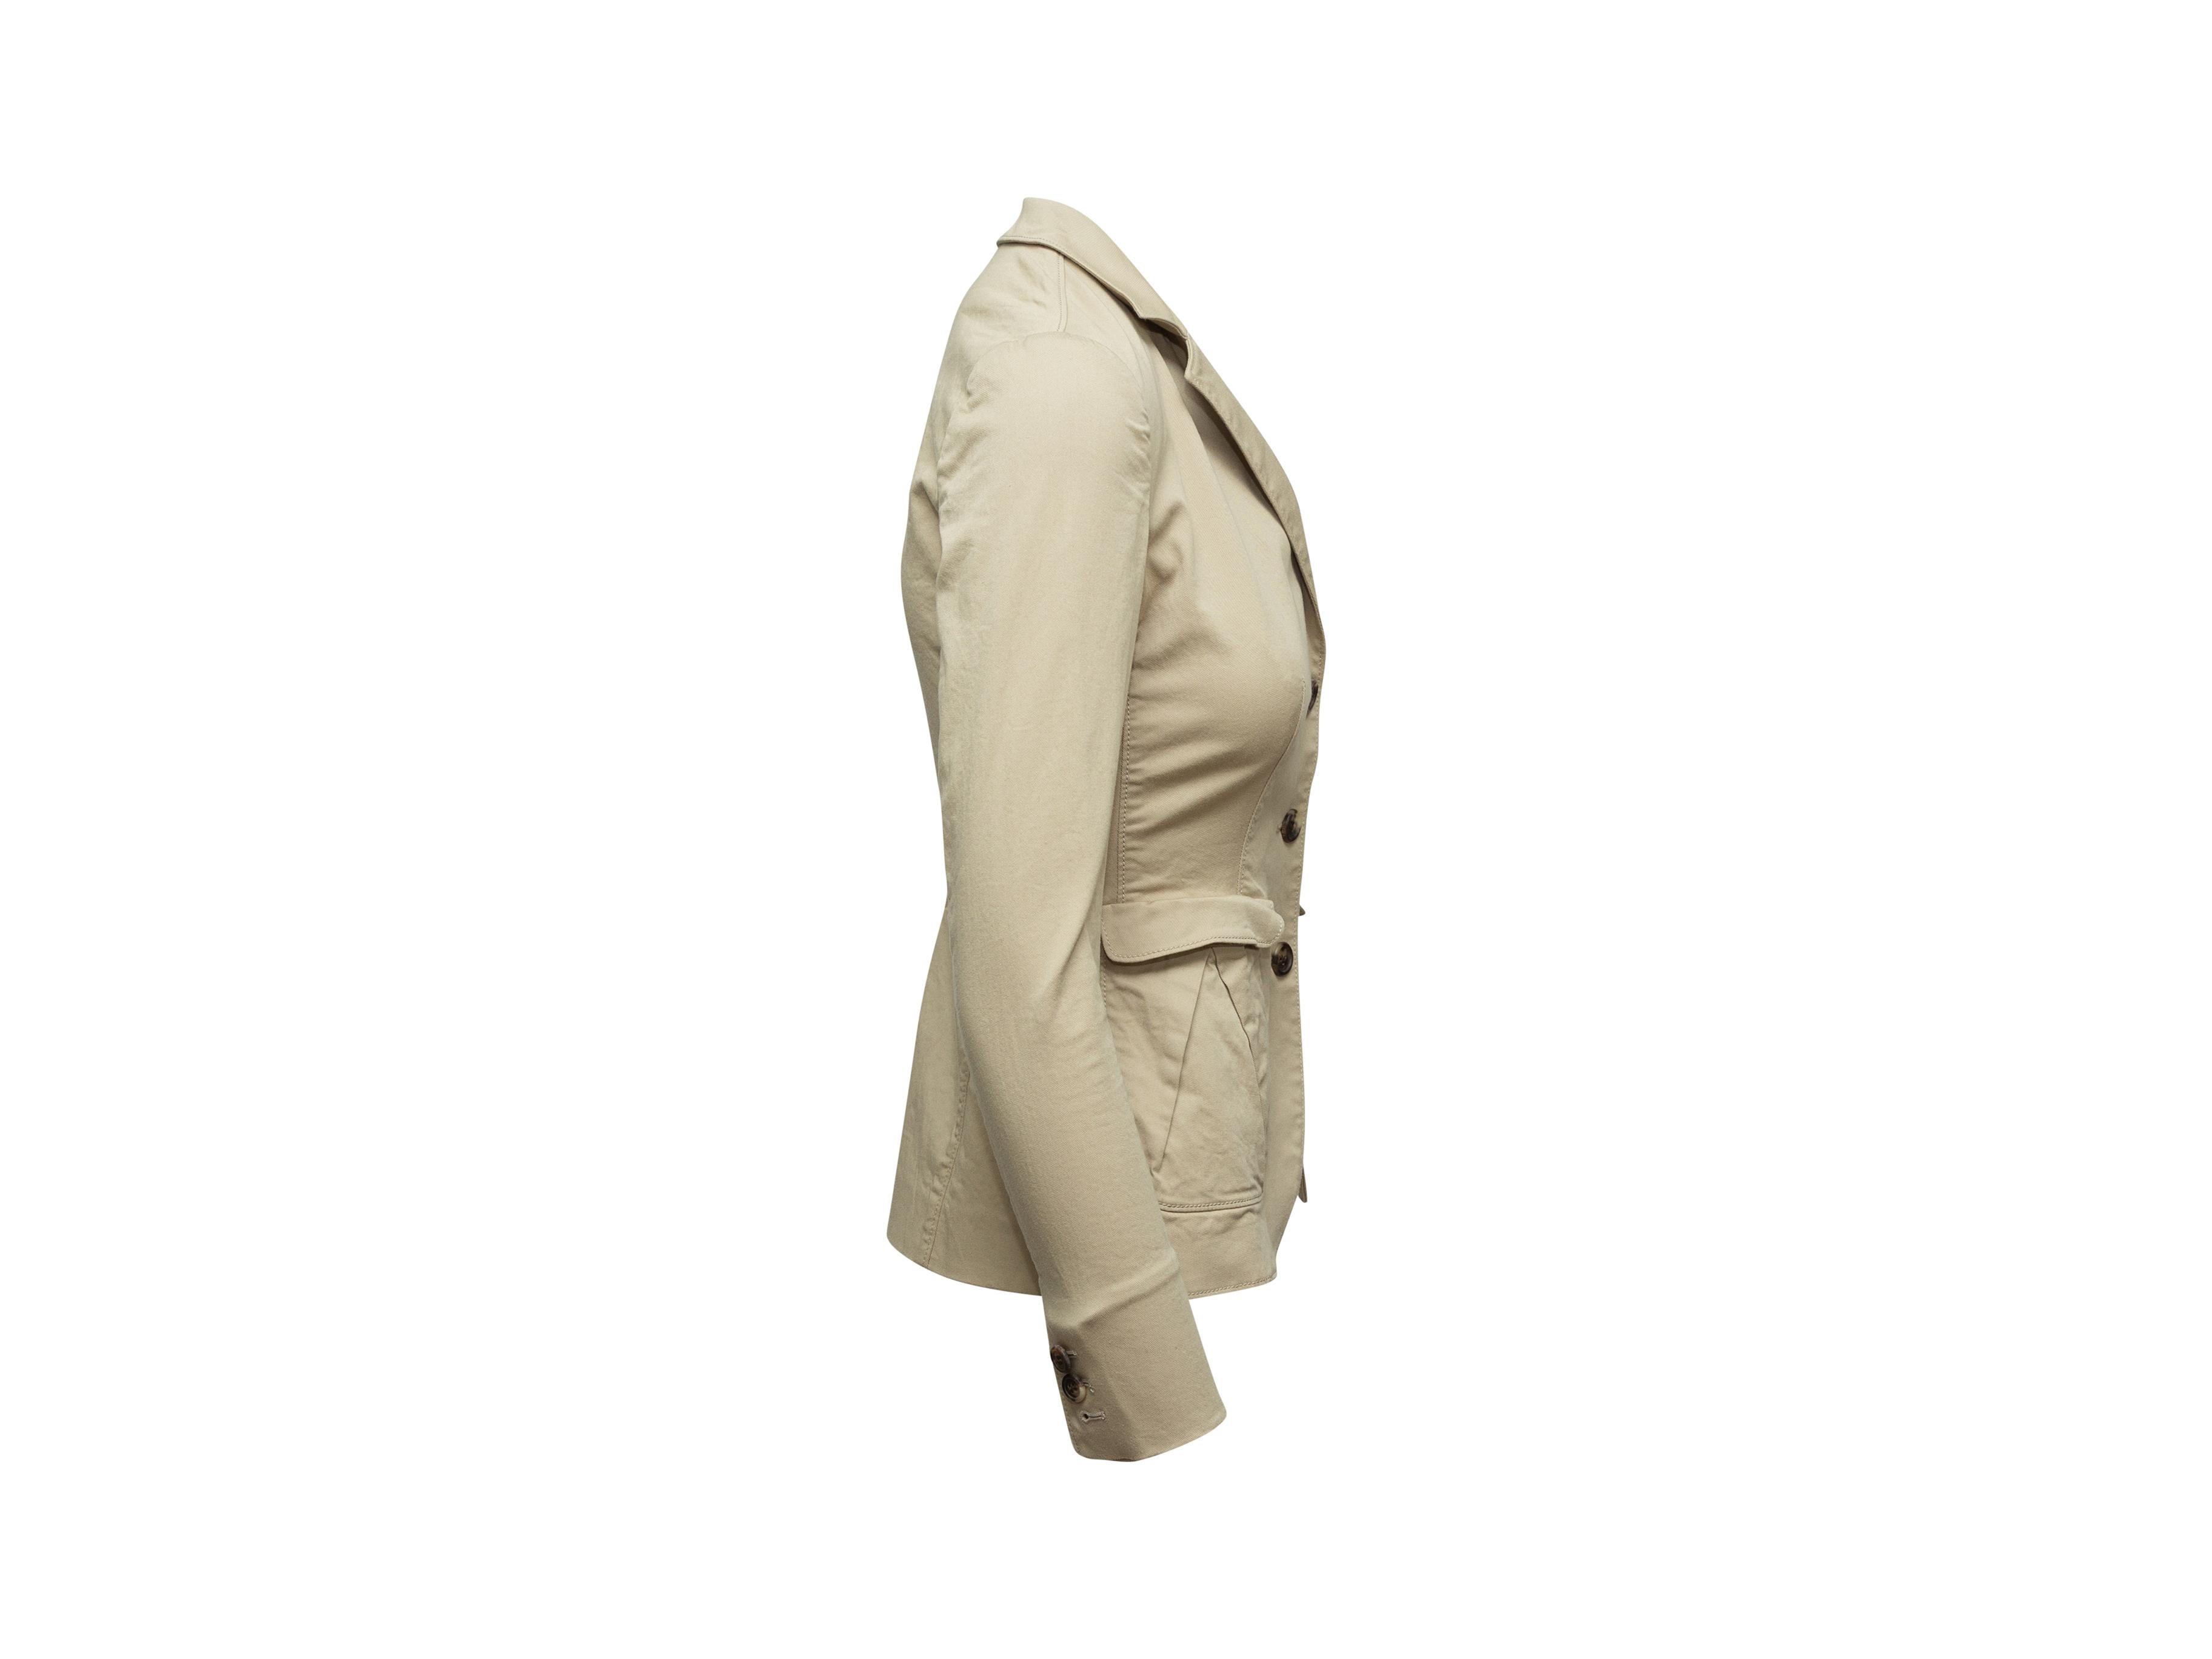 Product details: Beige cotton blazer by Prada. Notched collar. Three pockets. Button closures at center front. Designer size 40.
Condition: Pre-owned. Very good.
Est. Retail $ 795.00